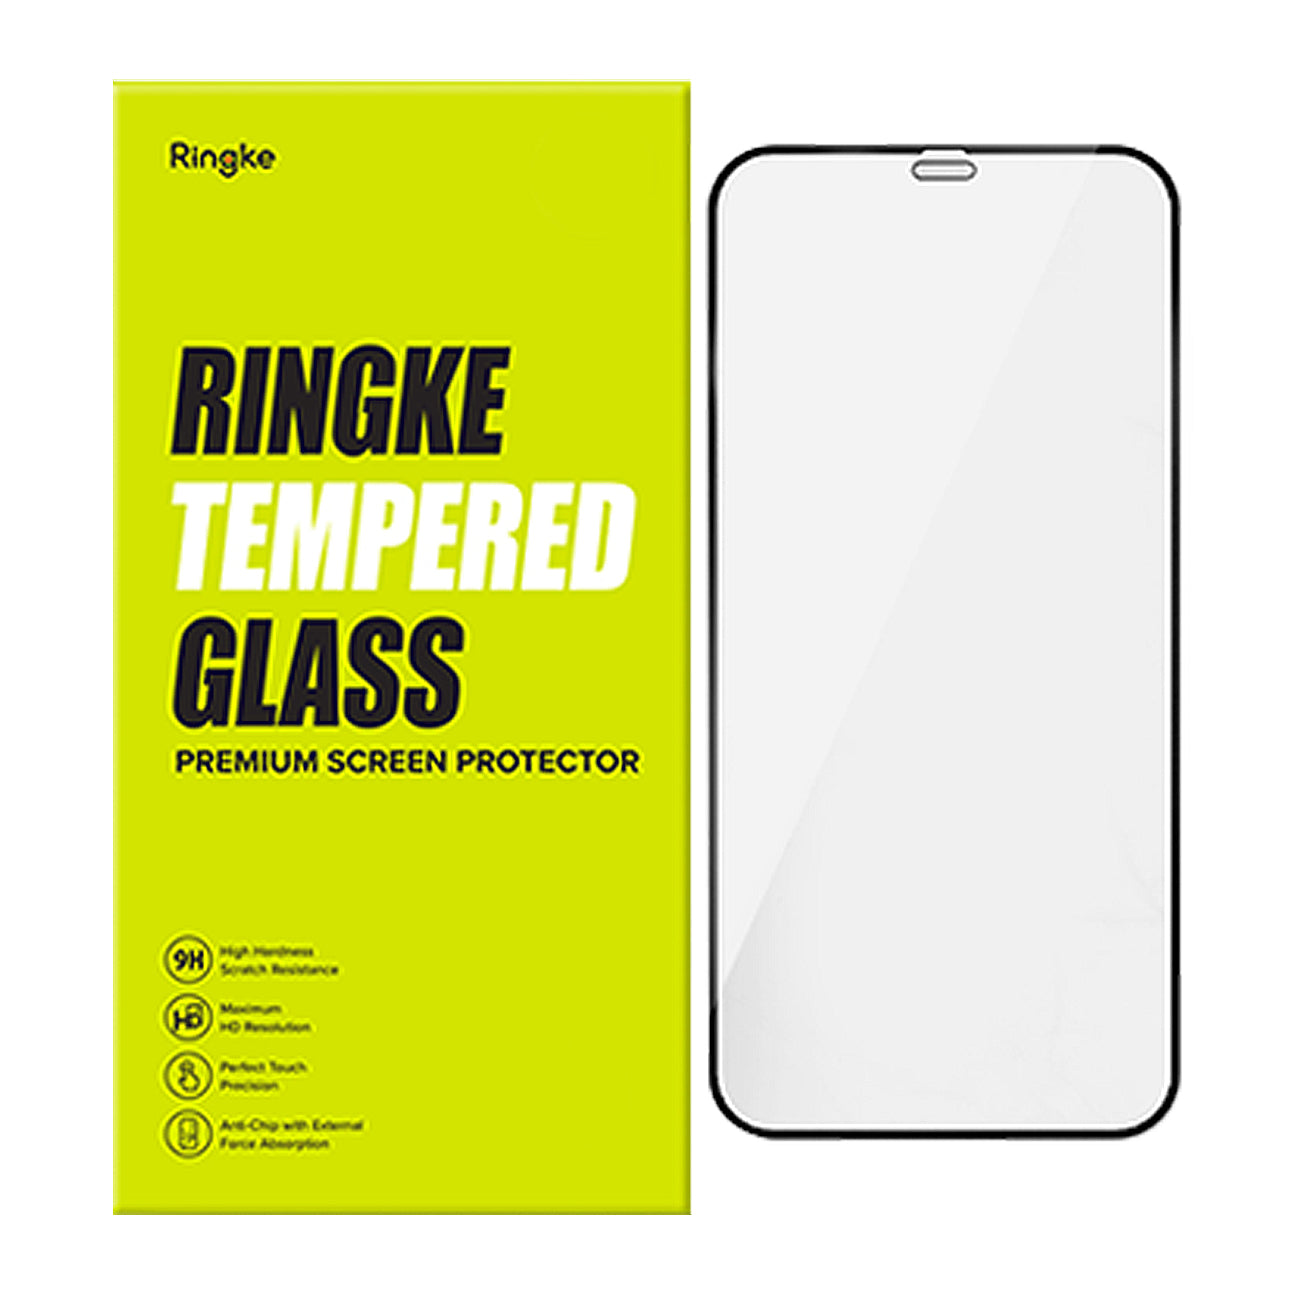 Ringke TEMPERED GLASS SCREEN PROTECTOR